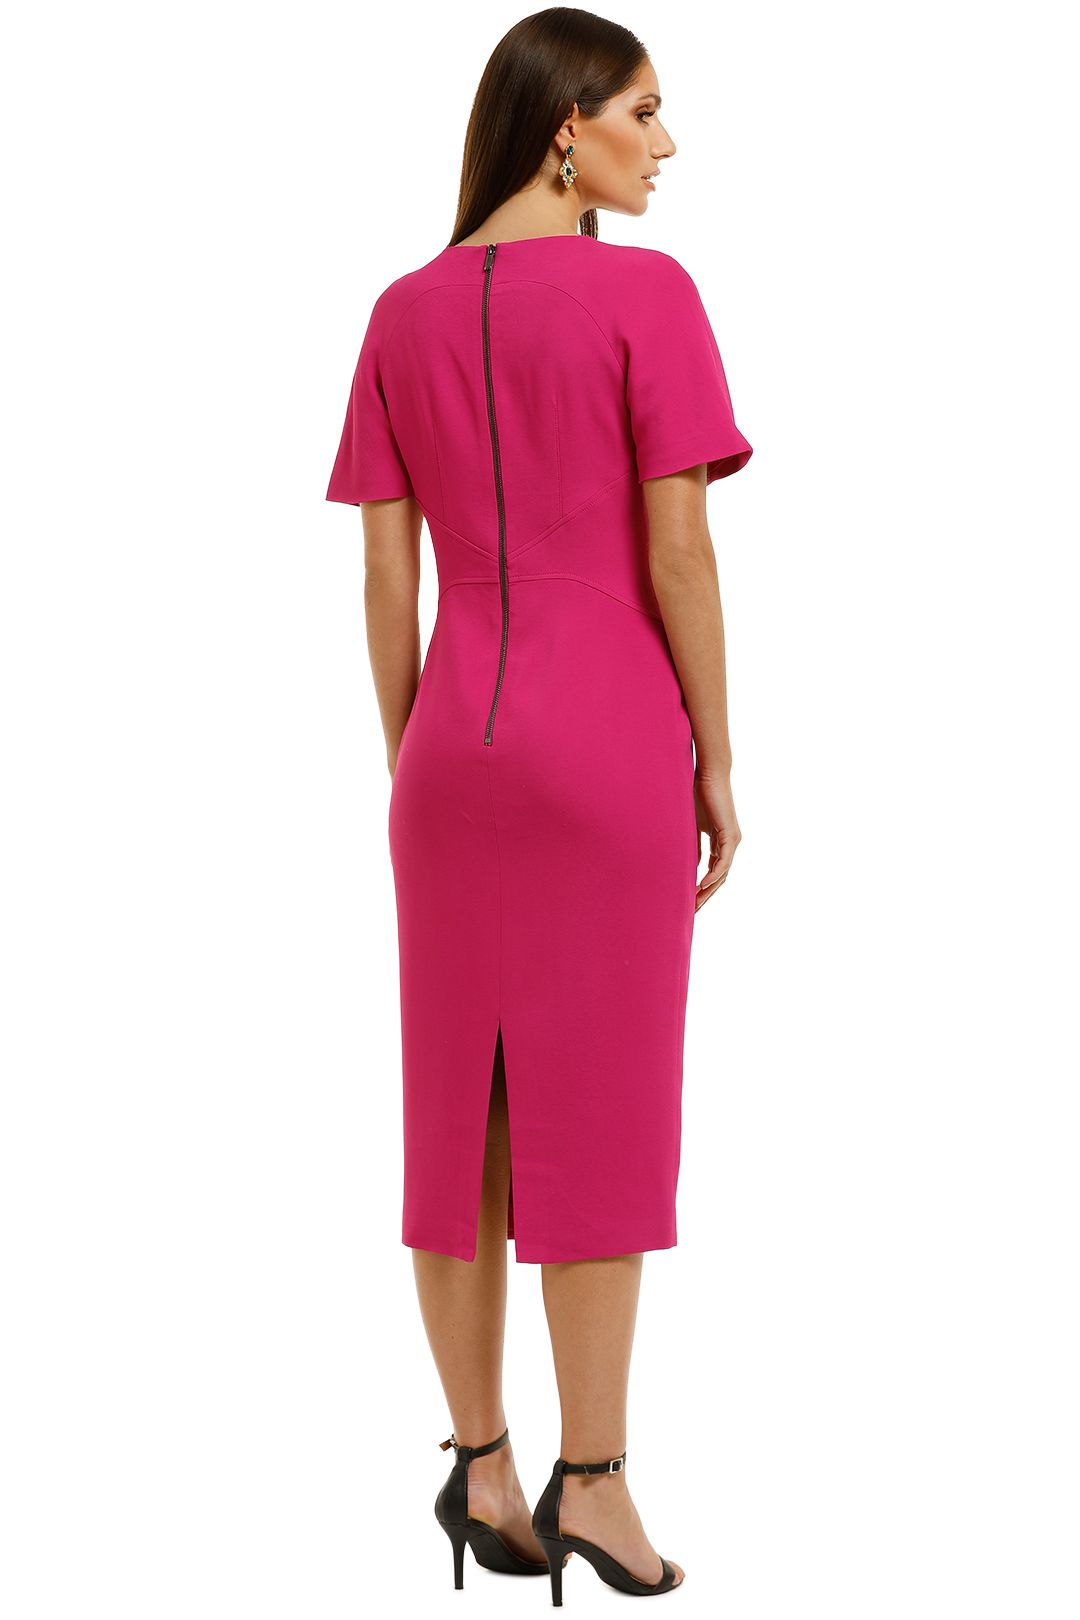 Ginger-and-Smart-Advocate-Fitted-Dress-Fuschia-Back